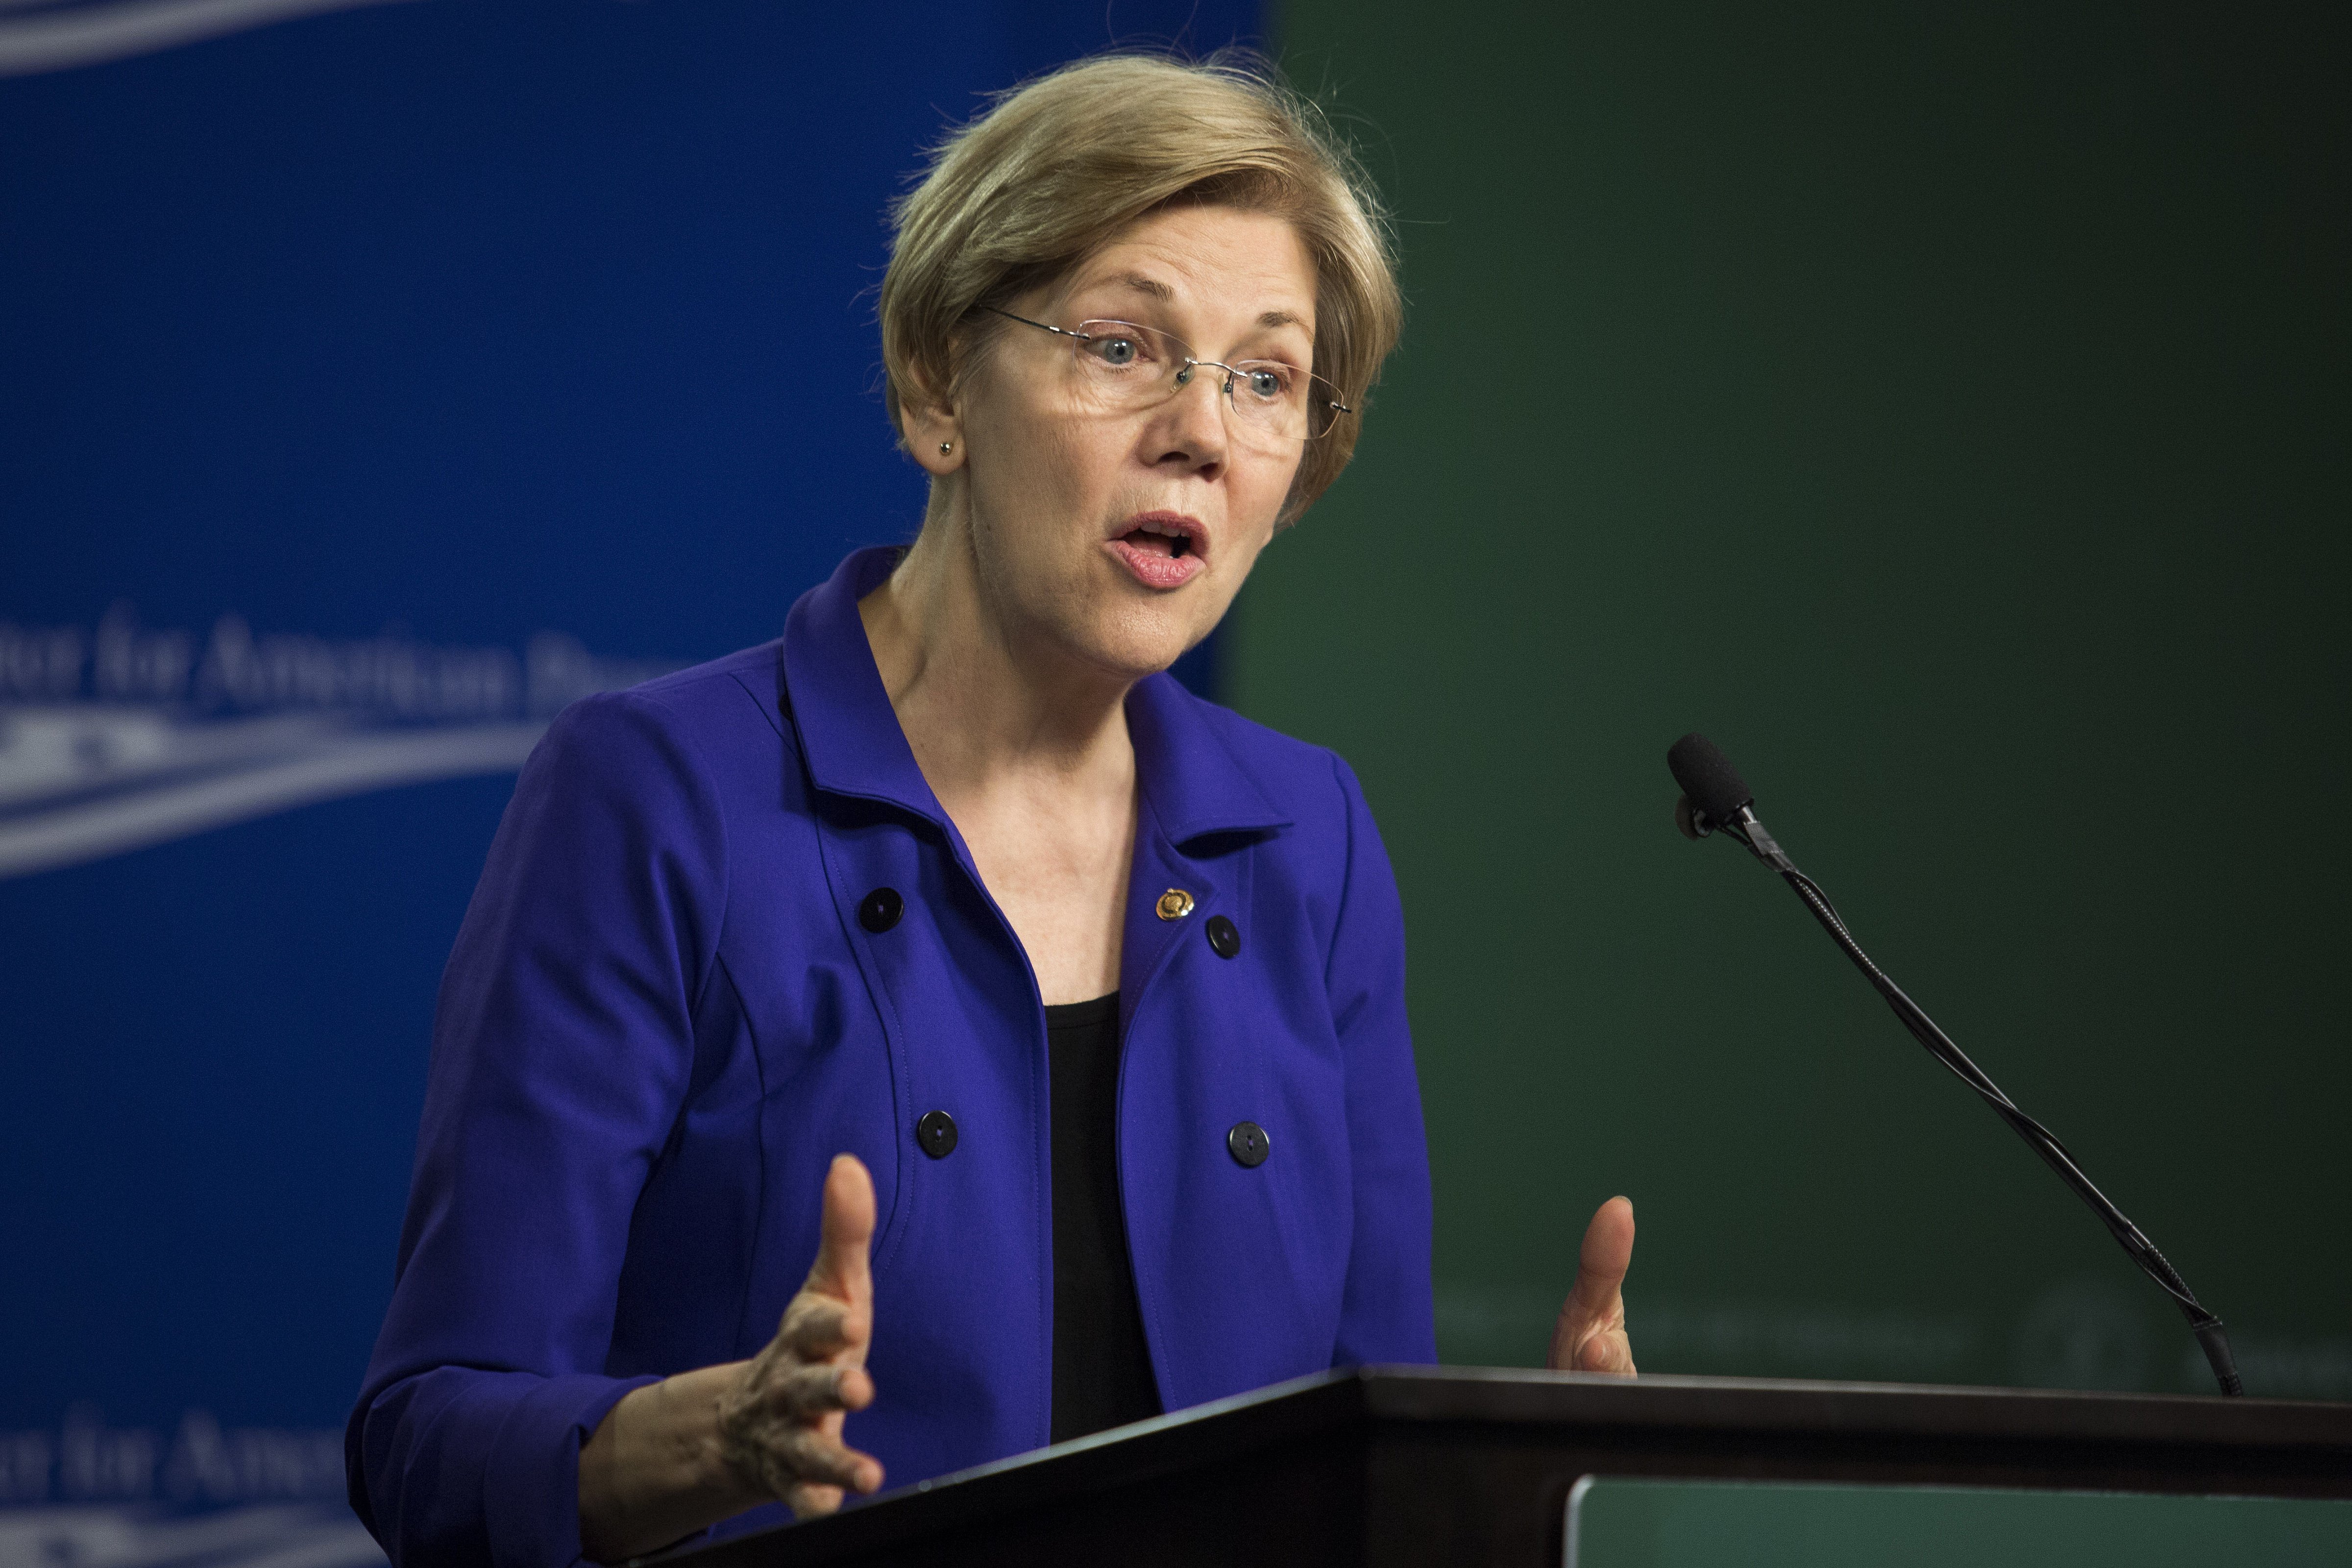 Senator Elizabeth Warren, a Democrat from Massachusetts, speaks during a U.S. Labor Department news conference at the Center for American Progress in Washington on April 6, 2016. (Drew Angerer—Bloomberg/Getty Images)